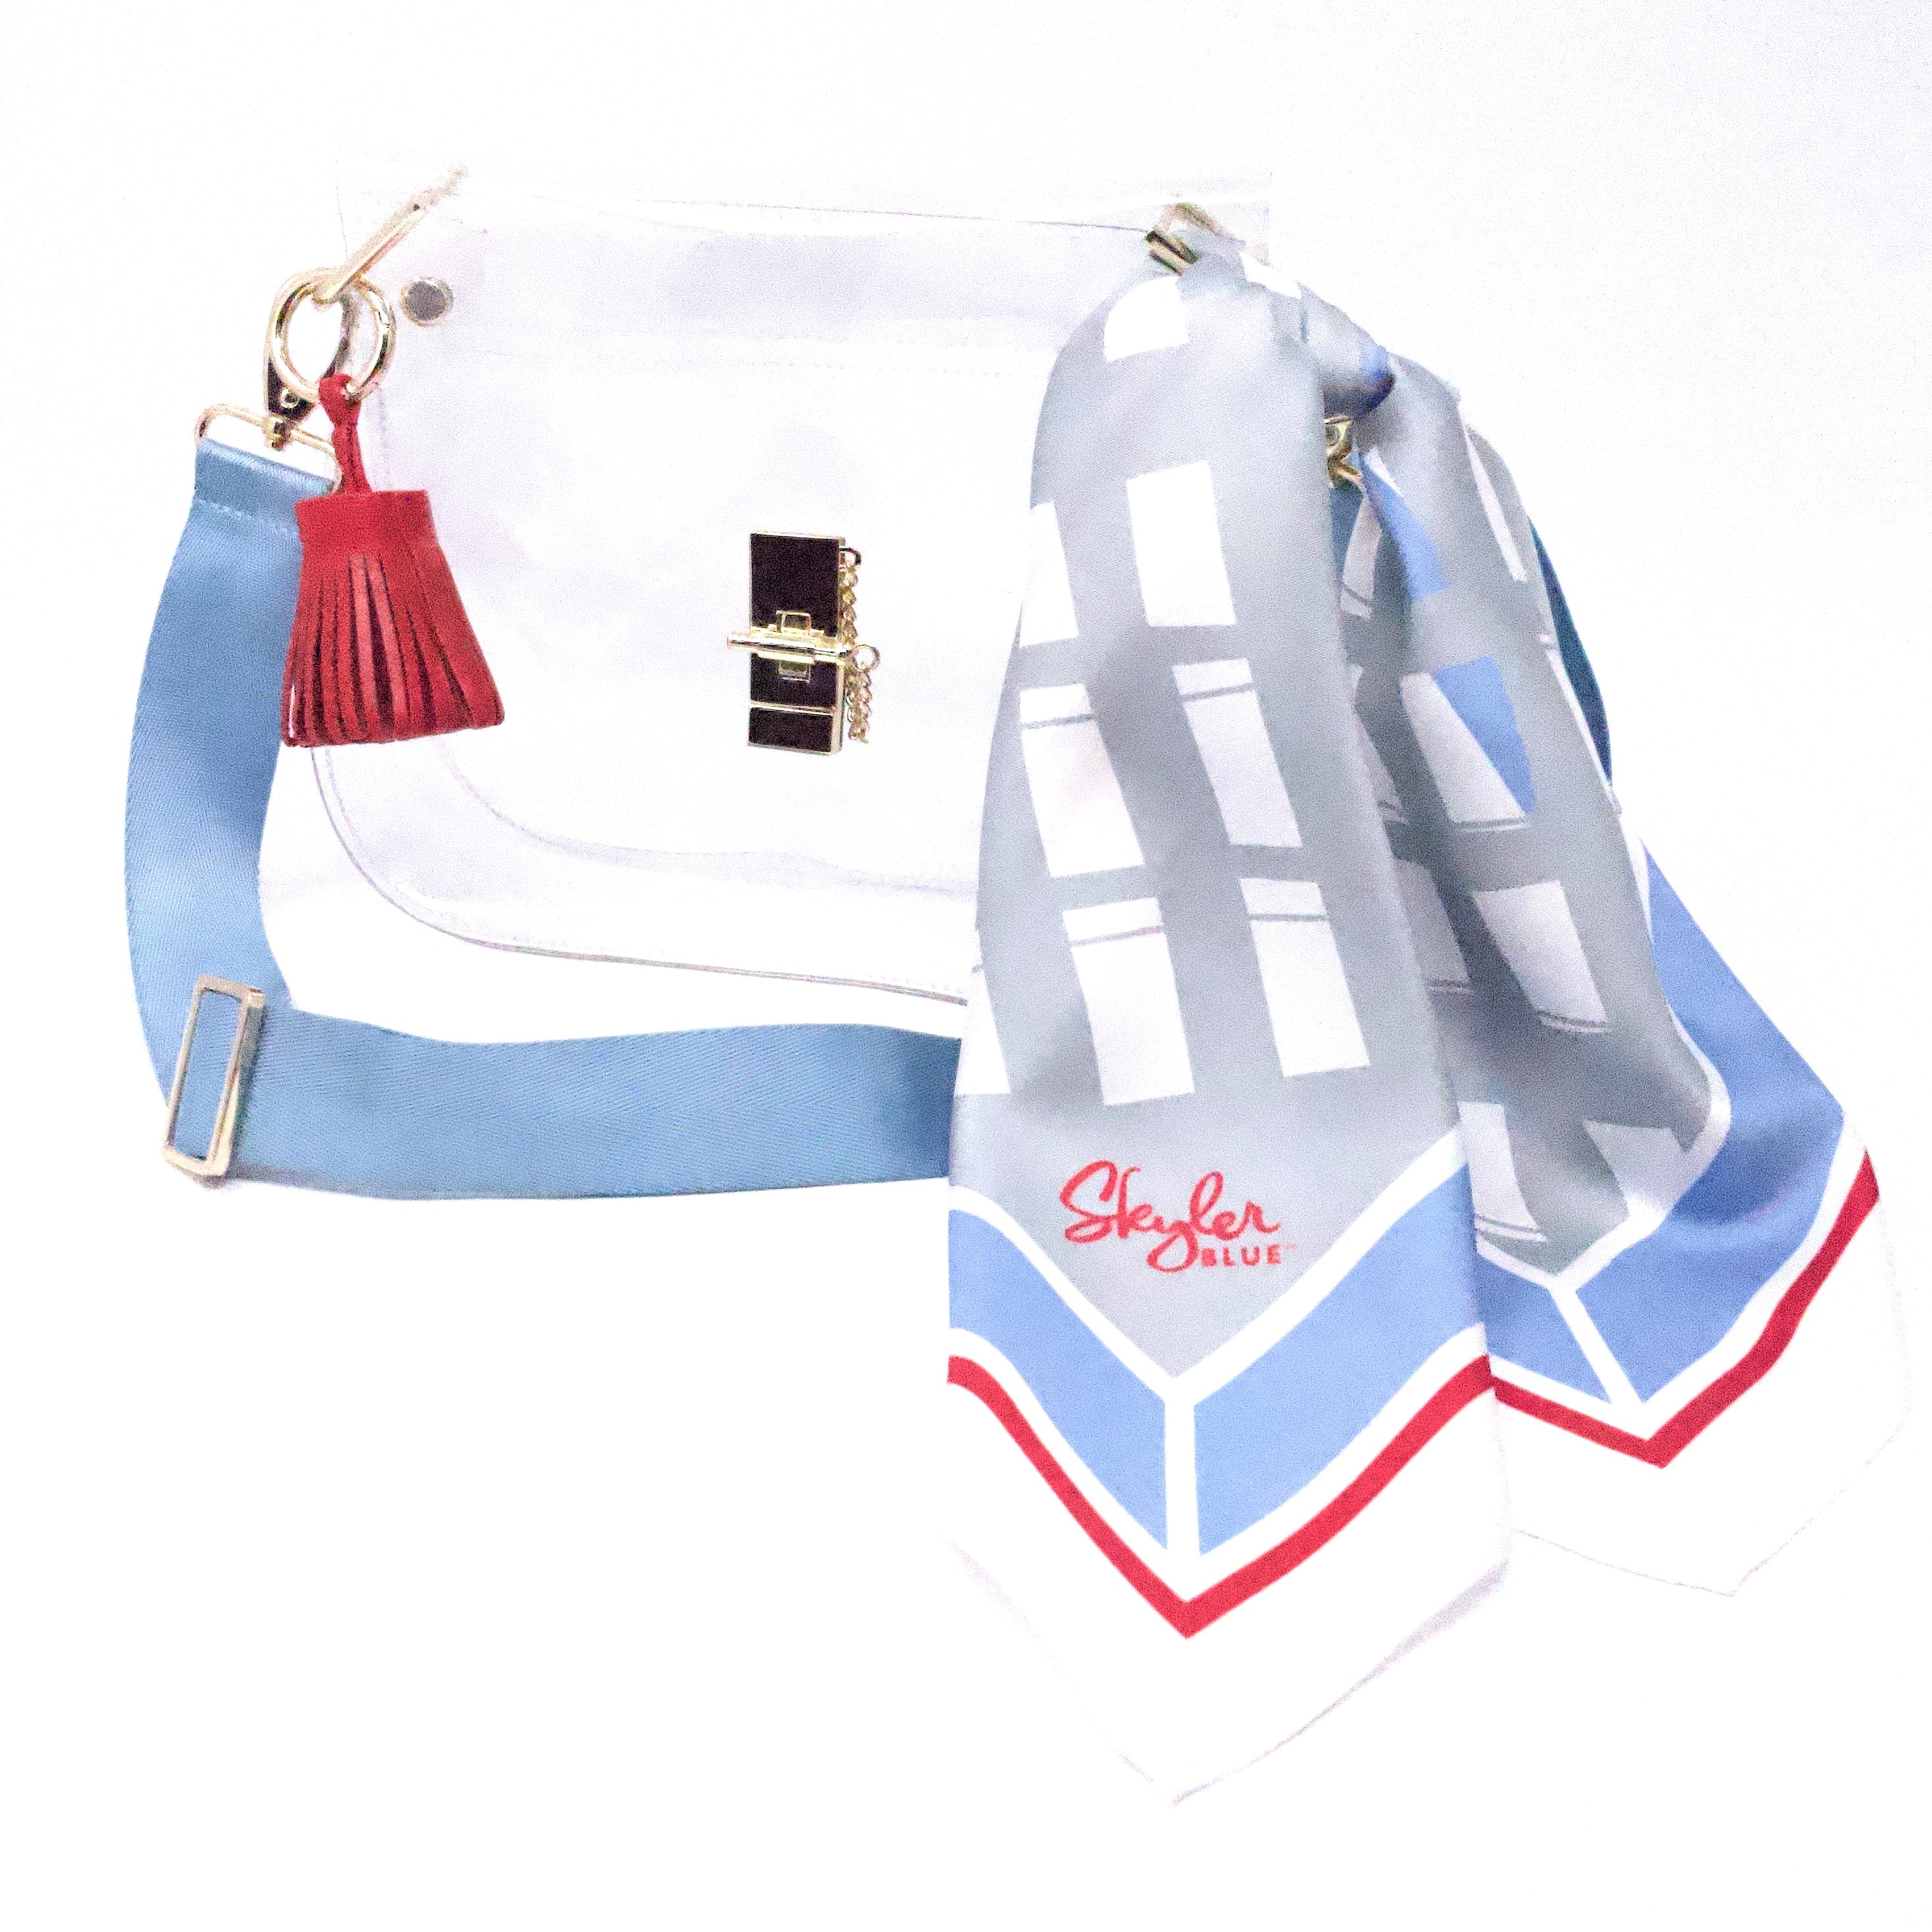 Skyler Blue’s The Dome - Luv Ya Medium Saddle Clear Bag stadium approved clear bag / clear purse including adjustable, nylon webbing shoulder or crossbody strap with herringbone weave and gold hardware, 60-centimeter 100% silk twill scarf, and 100% genuine leather tassel. 